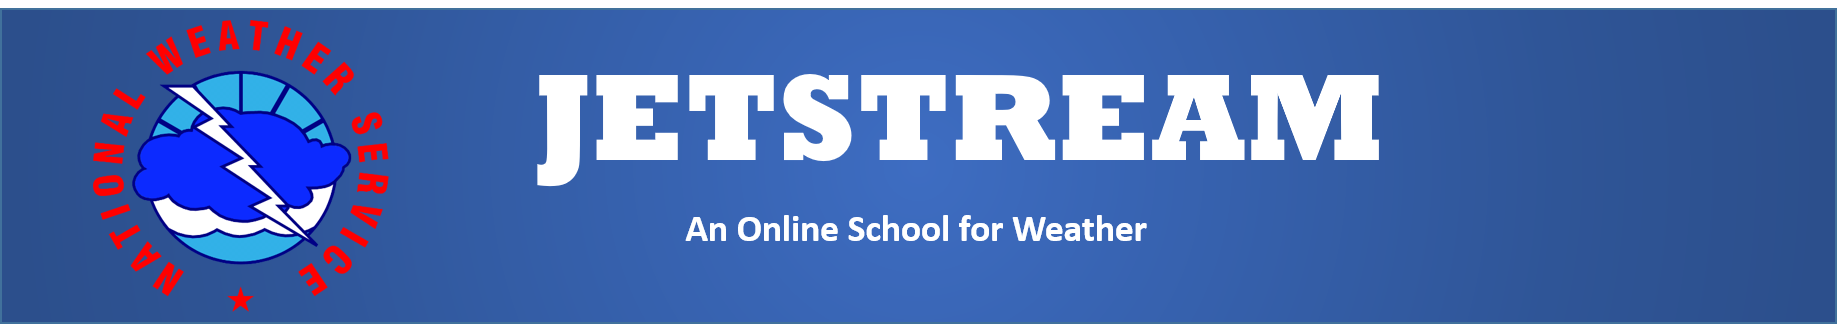 Clicking this image will take you to the Jetstream home page - an online school for weather from the NWS.